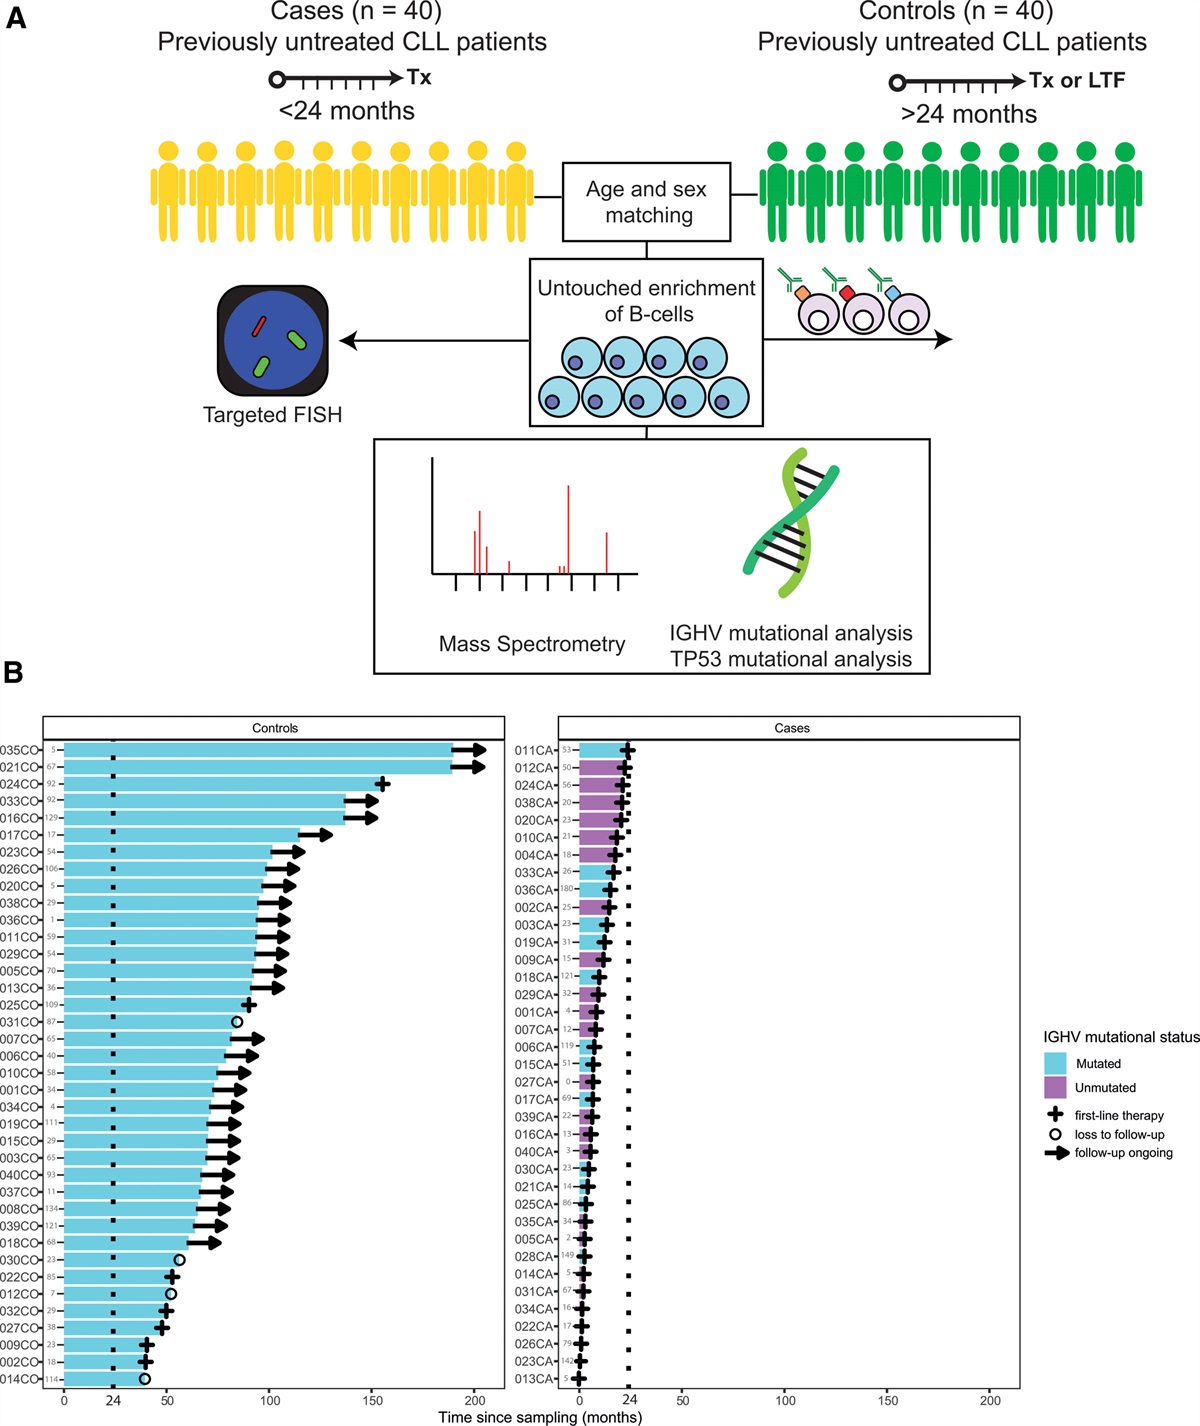 High-throughput Proteomics Identifies THEMIS2 as Independent Biomarker of Treatment-free Survival in Untreated CLL